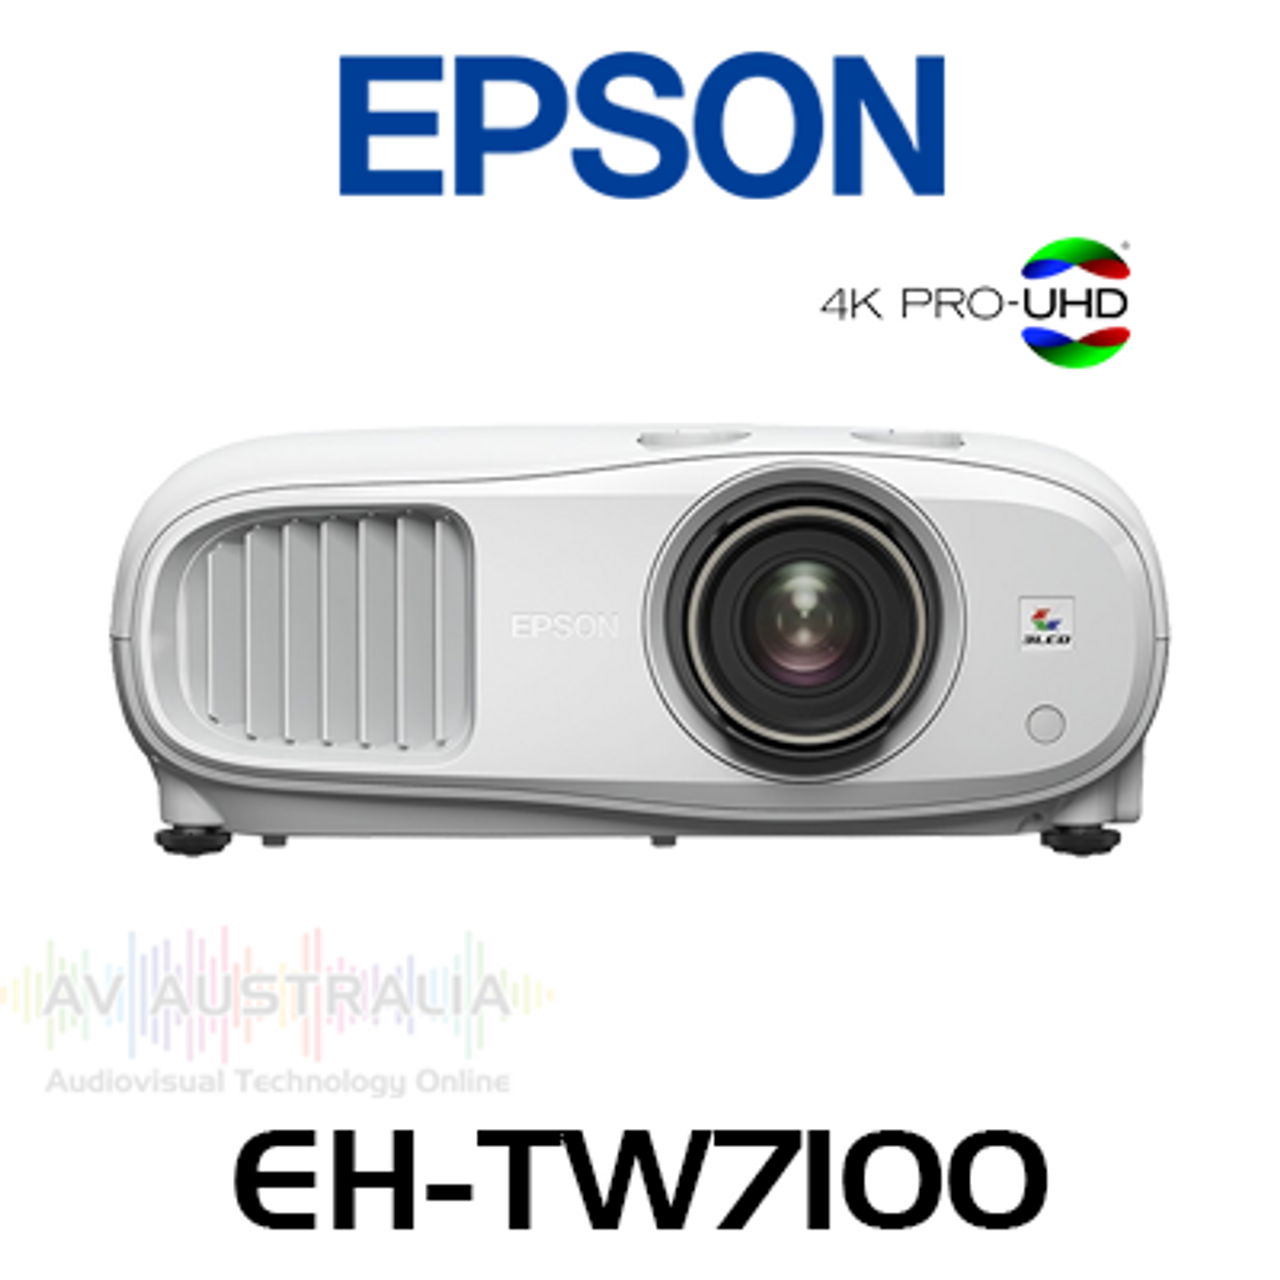 Epson EH-TW7100 4K Pro-UHD HDR 3000 Lumen 3D Home Theatre 3LCD Projector